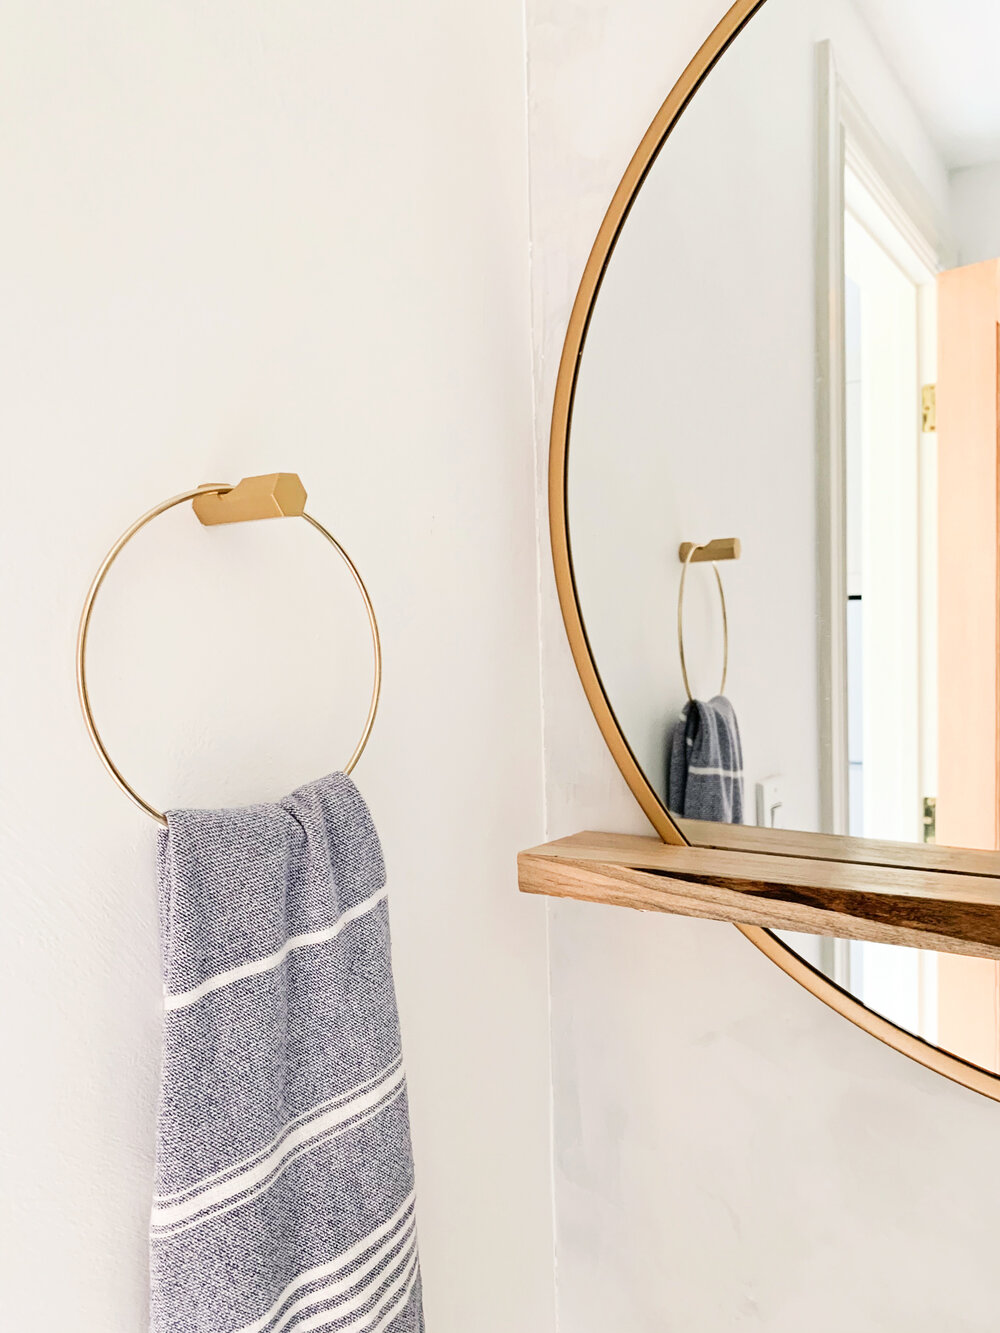  I created the towel ring out of a wall hook from Cb2 and a brass craft ring when I couldn’t find one I liked. 